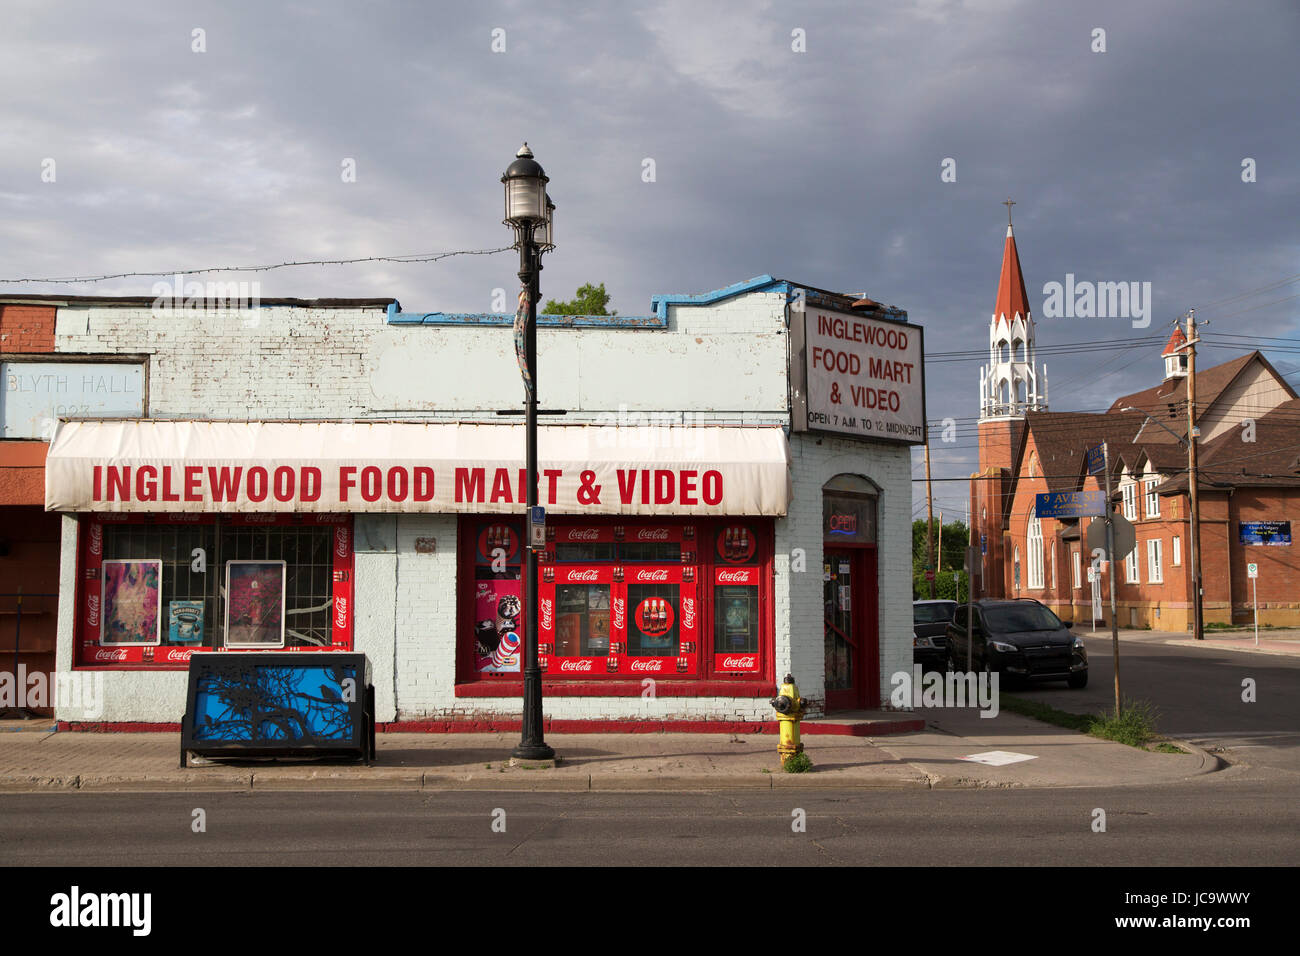 The Inglewood Food Mart and Video store at the Inglewood district of Calgary, Canada. Inglewood is one of the oldest districts in Calgary. Stock Photo